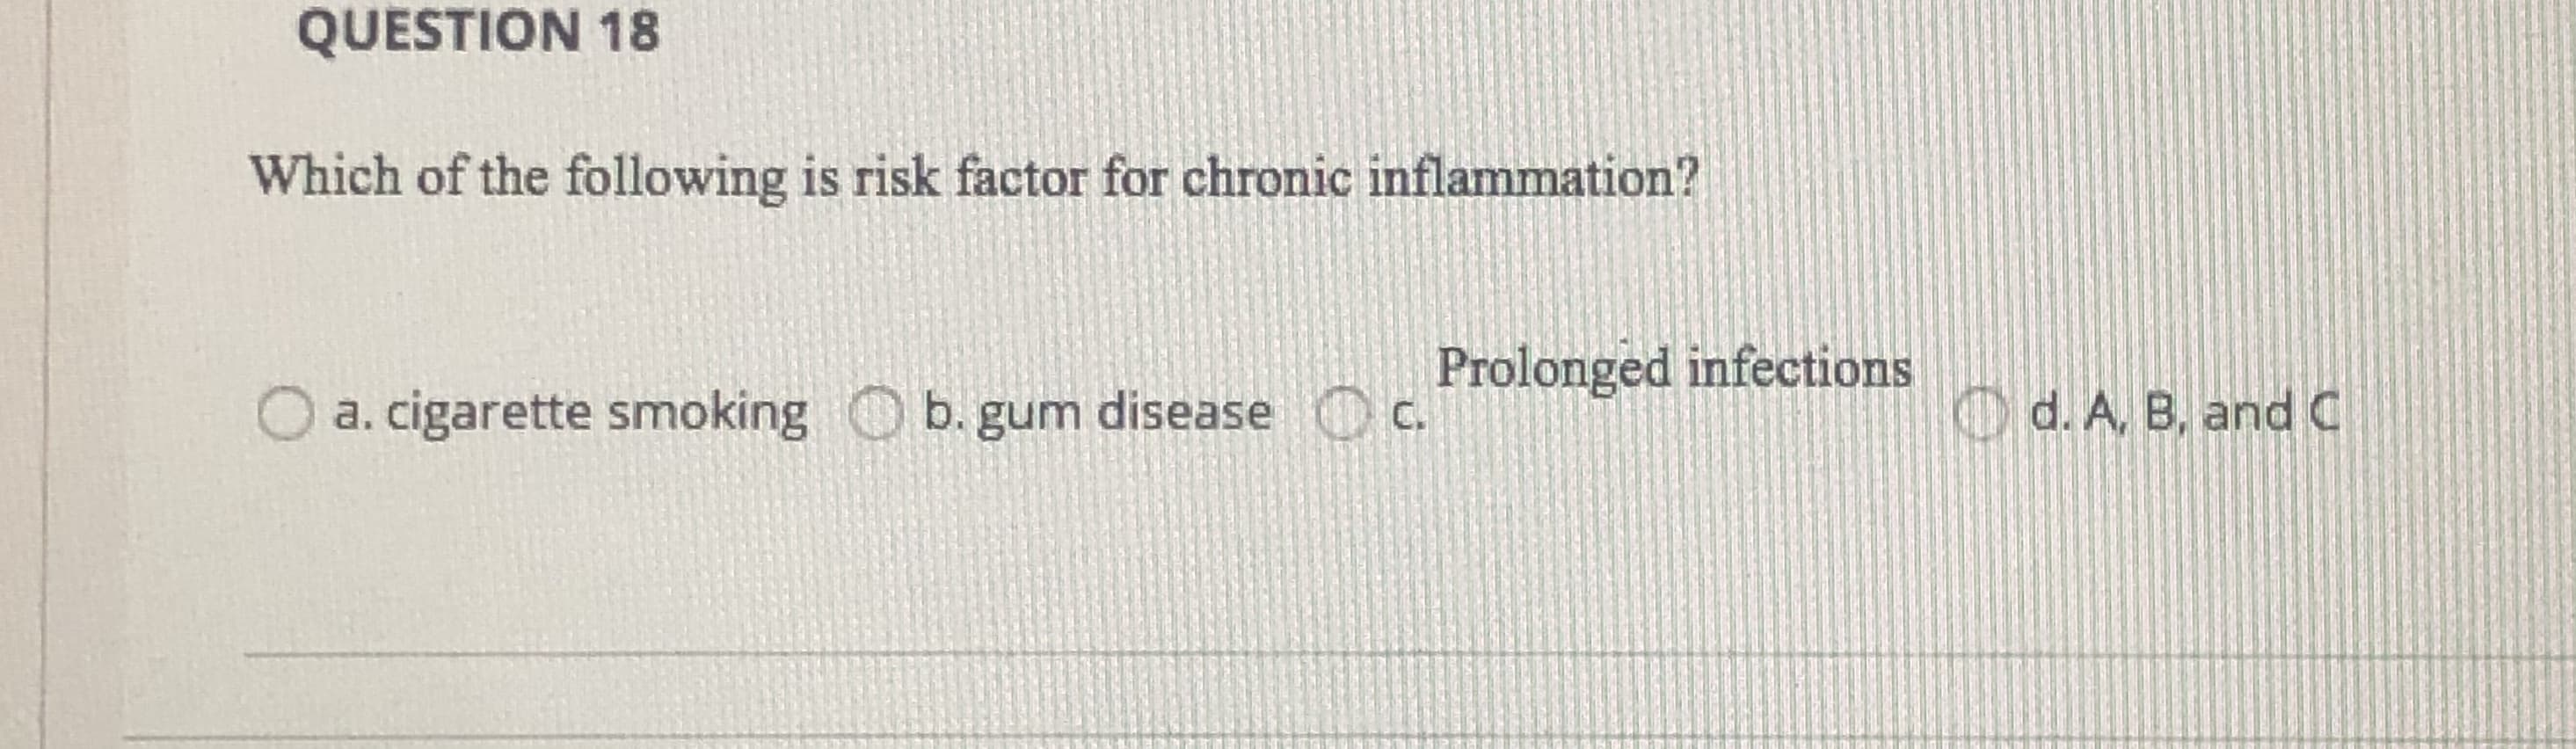 Which of the following is risk factor for chronic inflammation?
